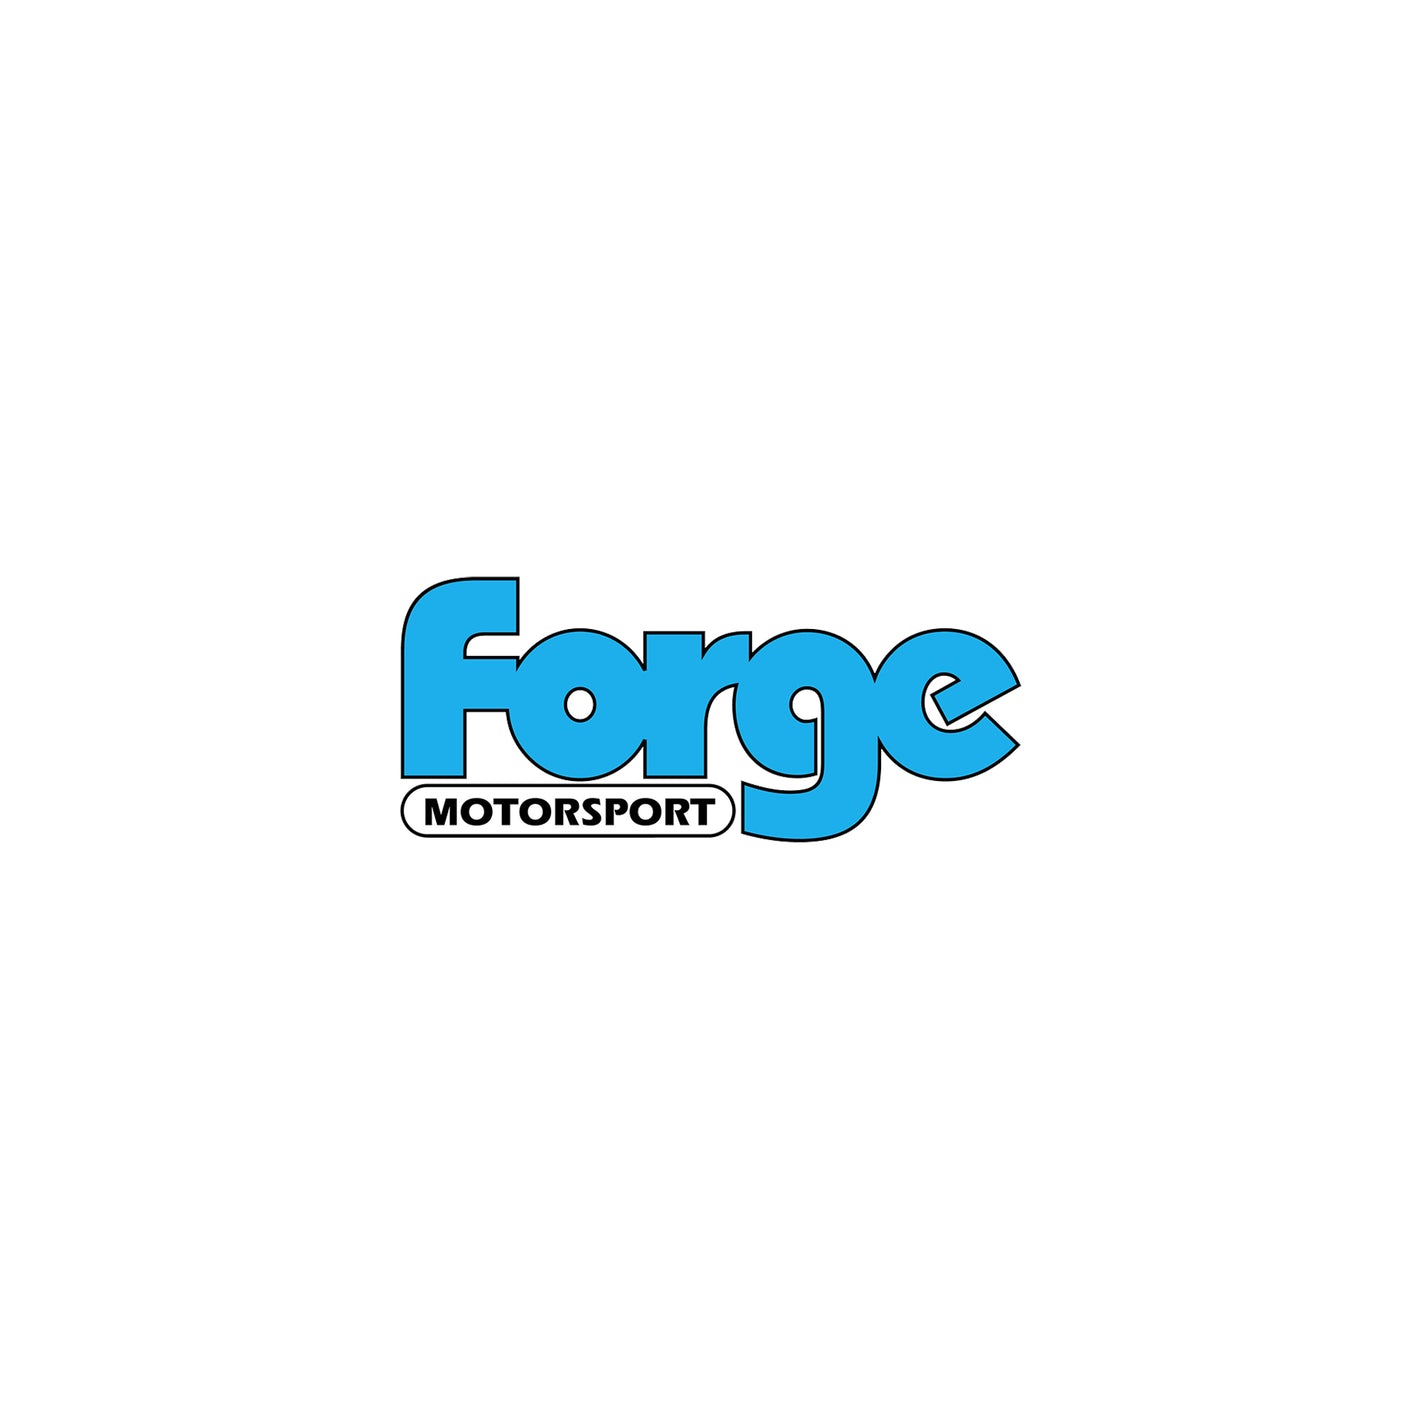 All Forge Products